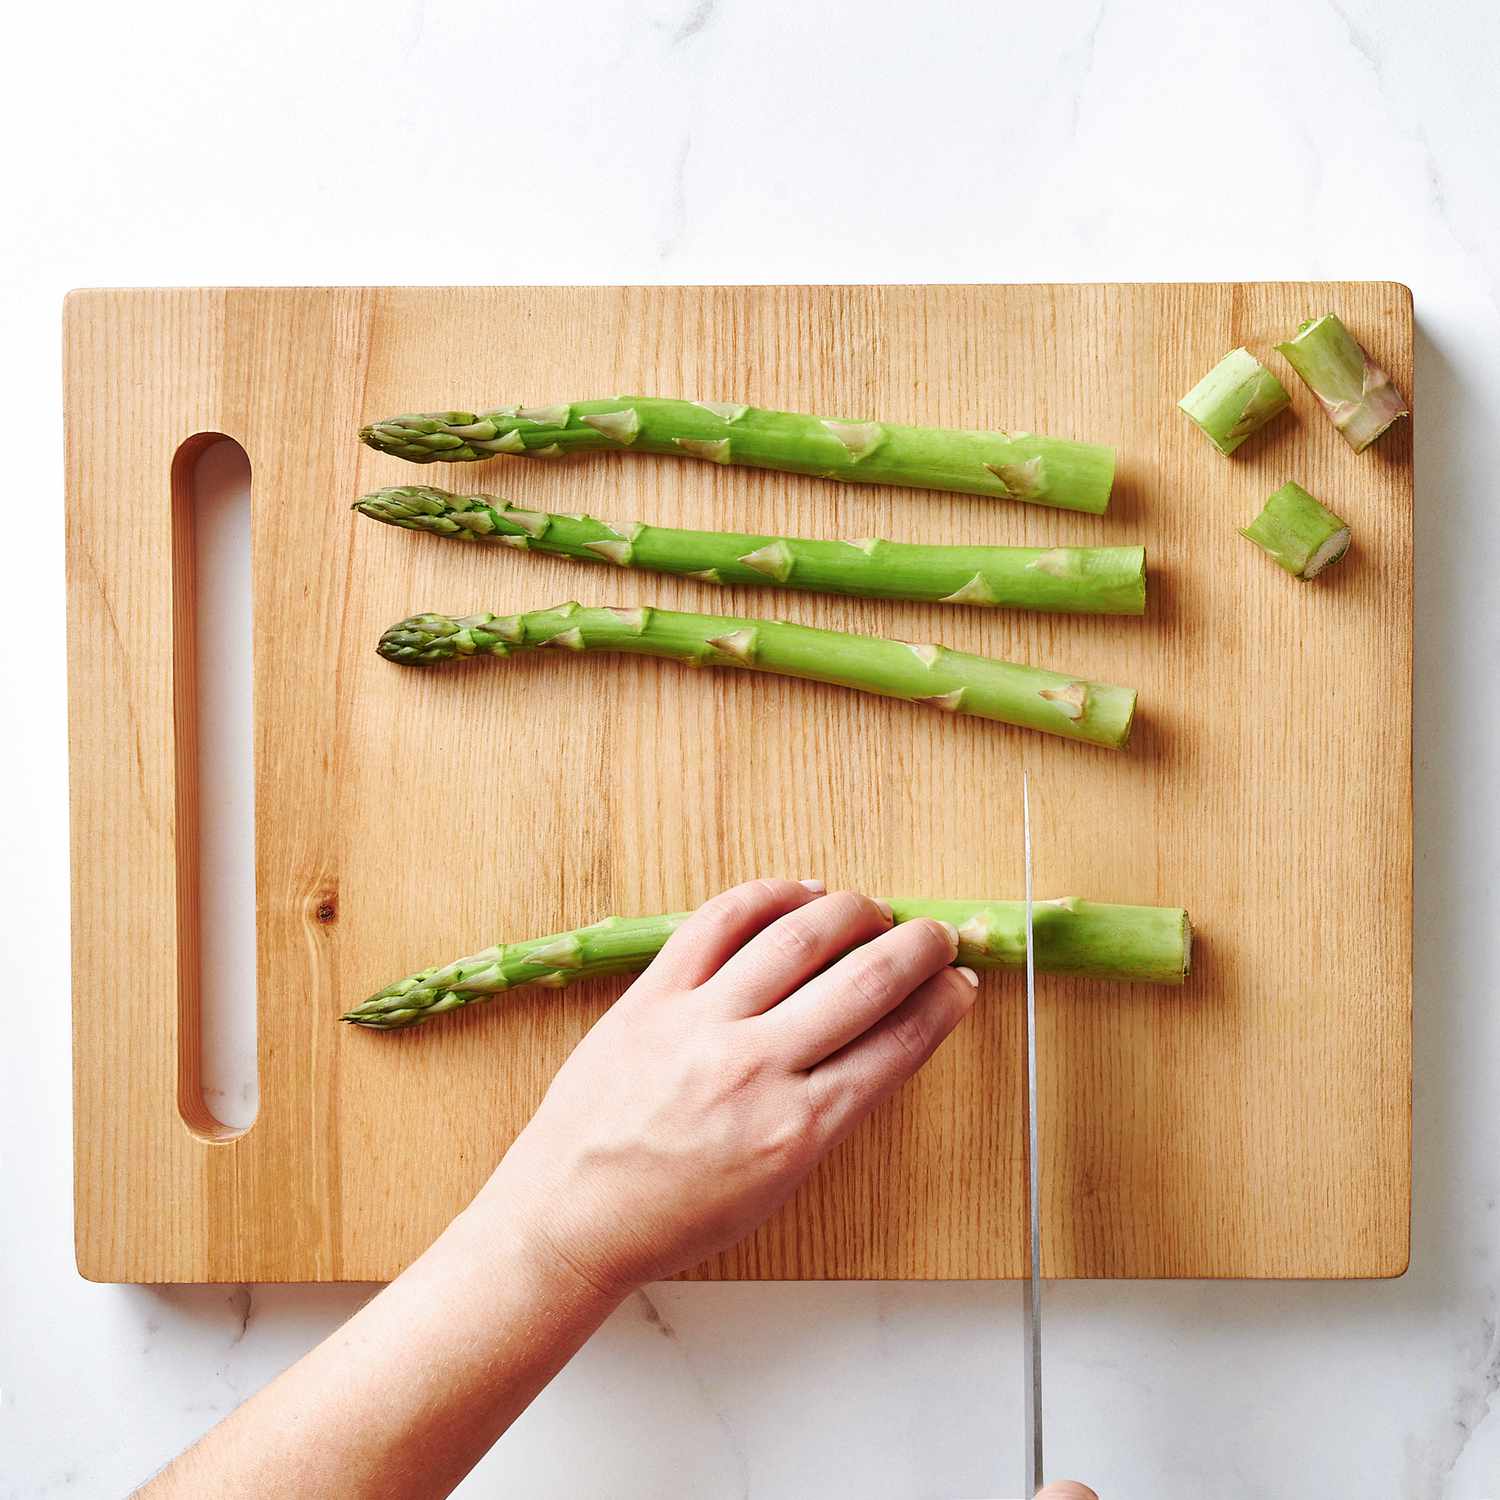 Close up of hands cutting the ends off asparagus